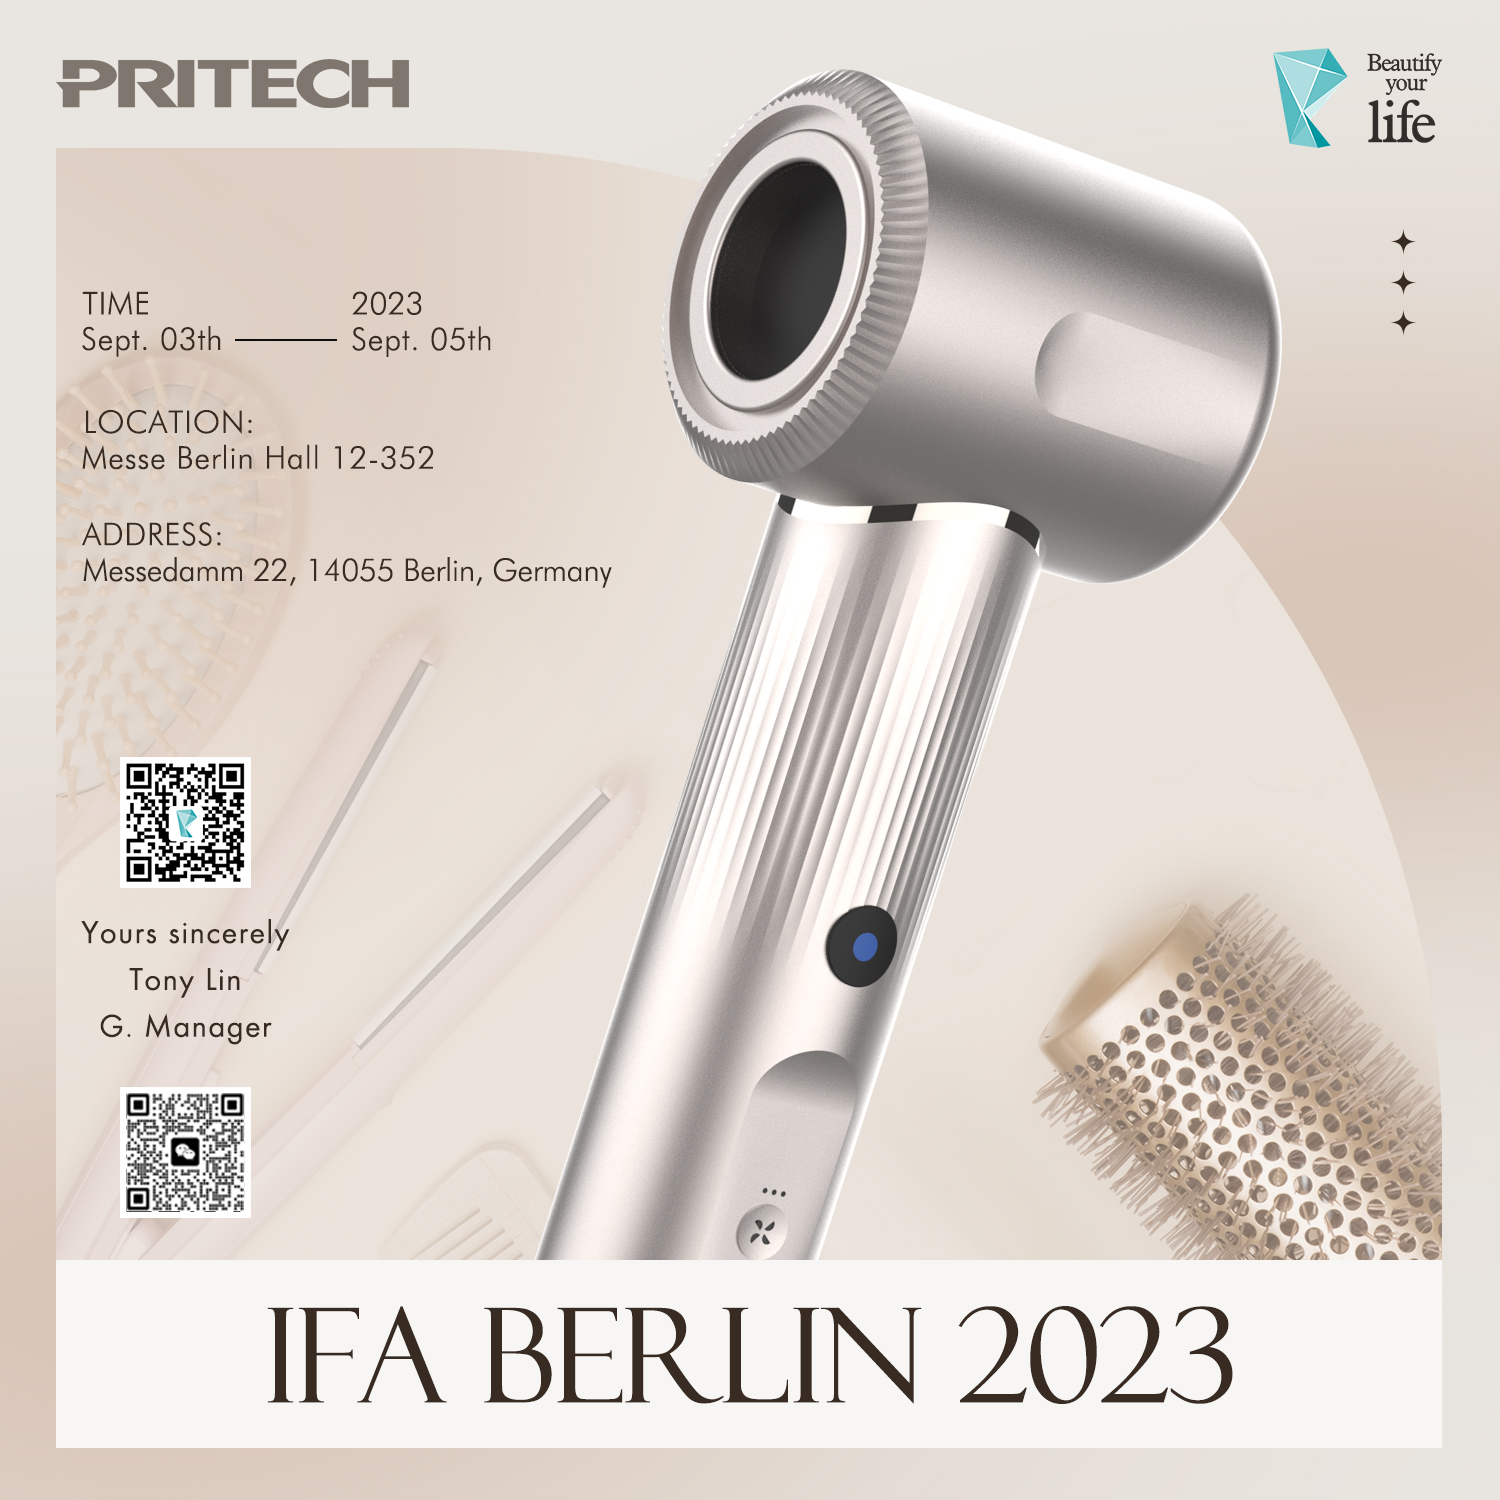  Pritech's Exciting Venture at IFA Berlin 2023